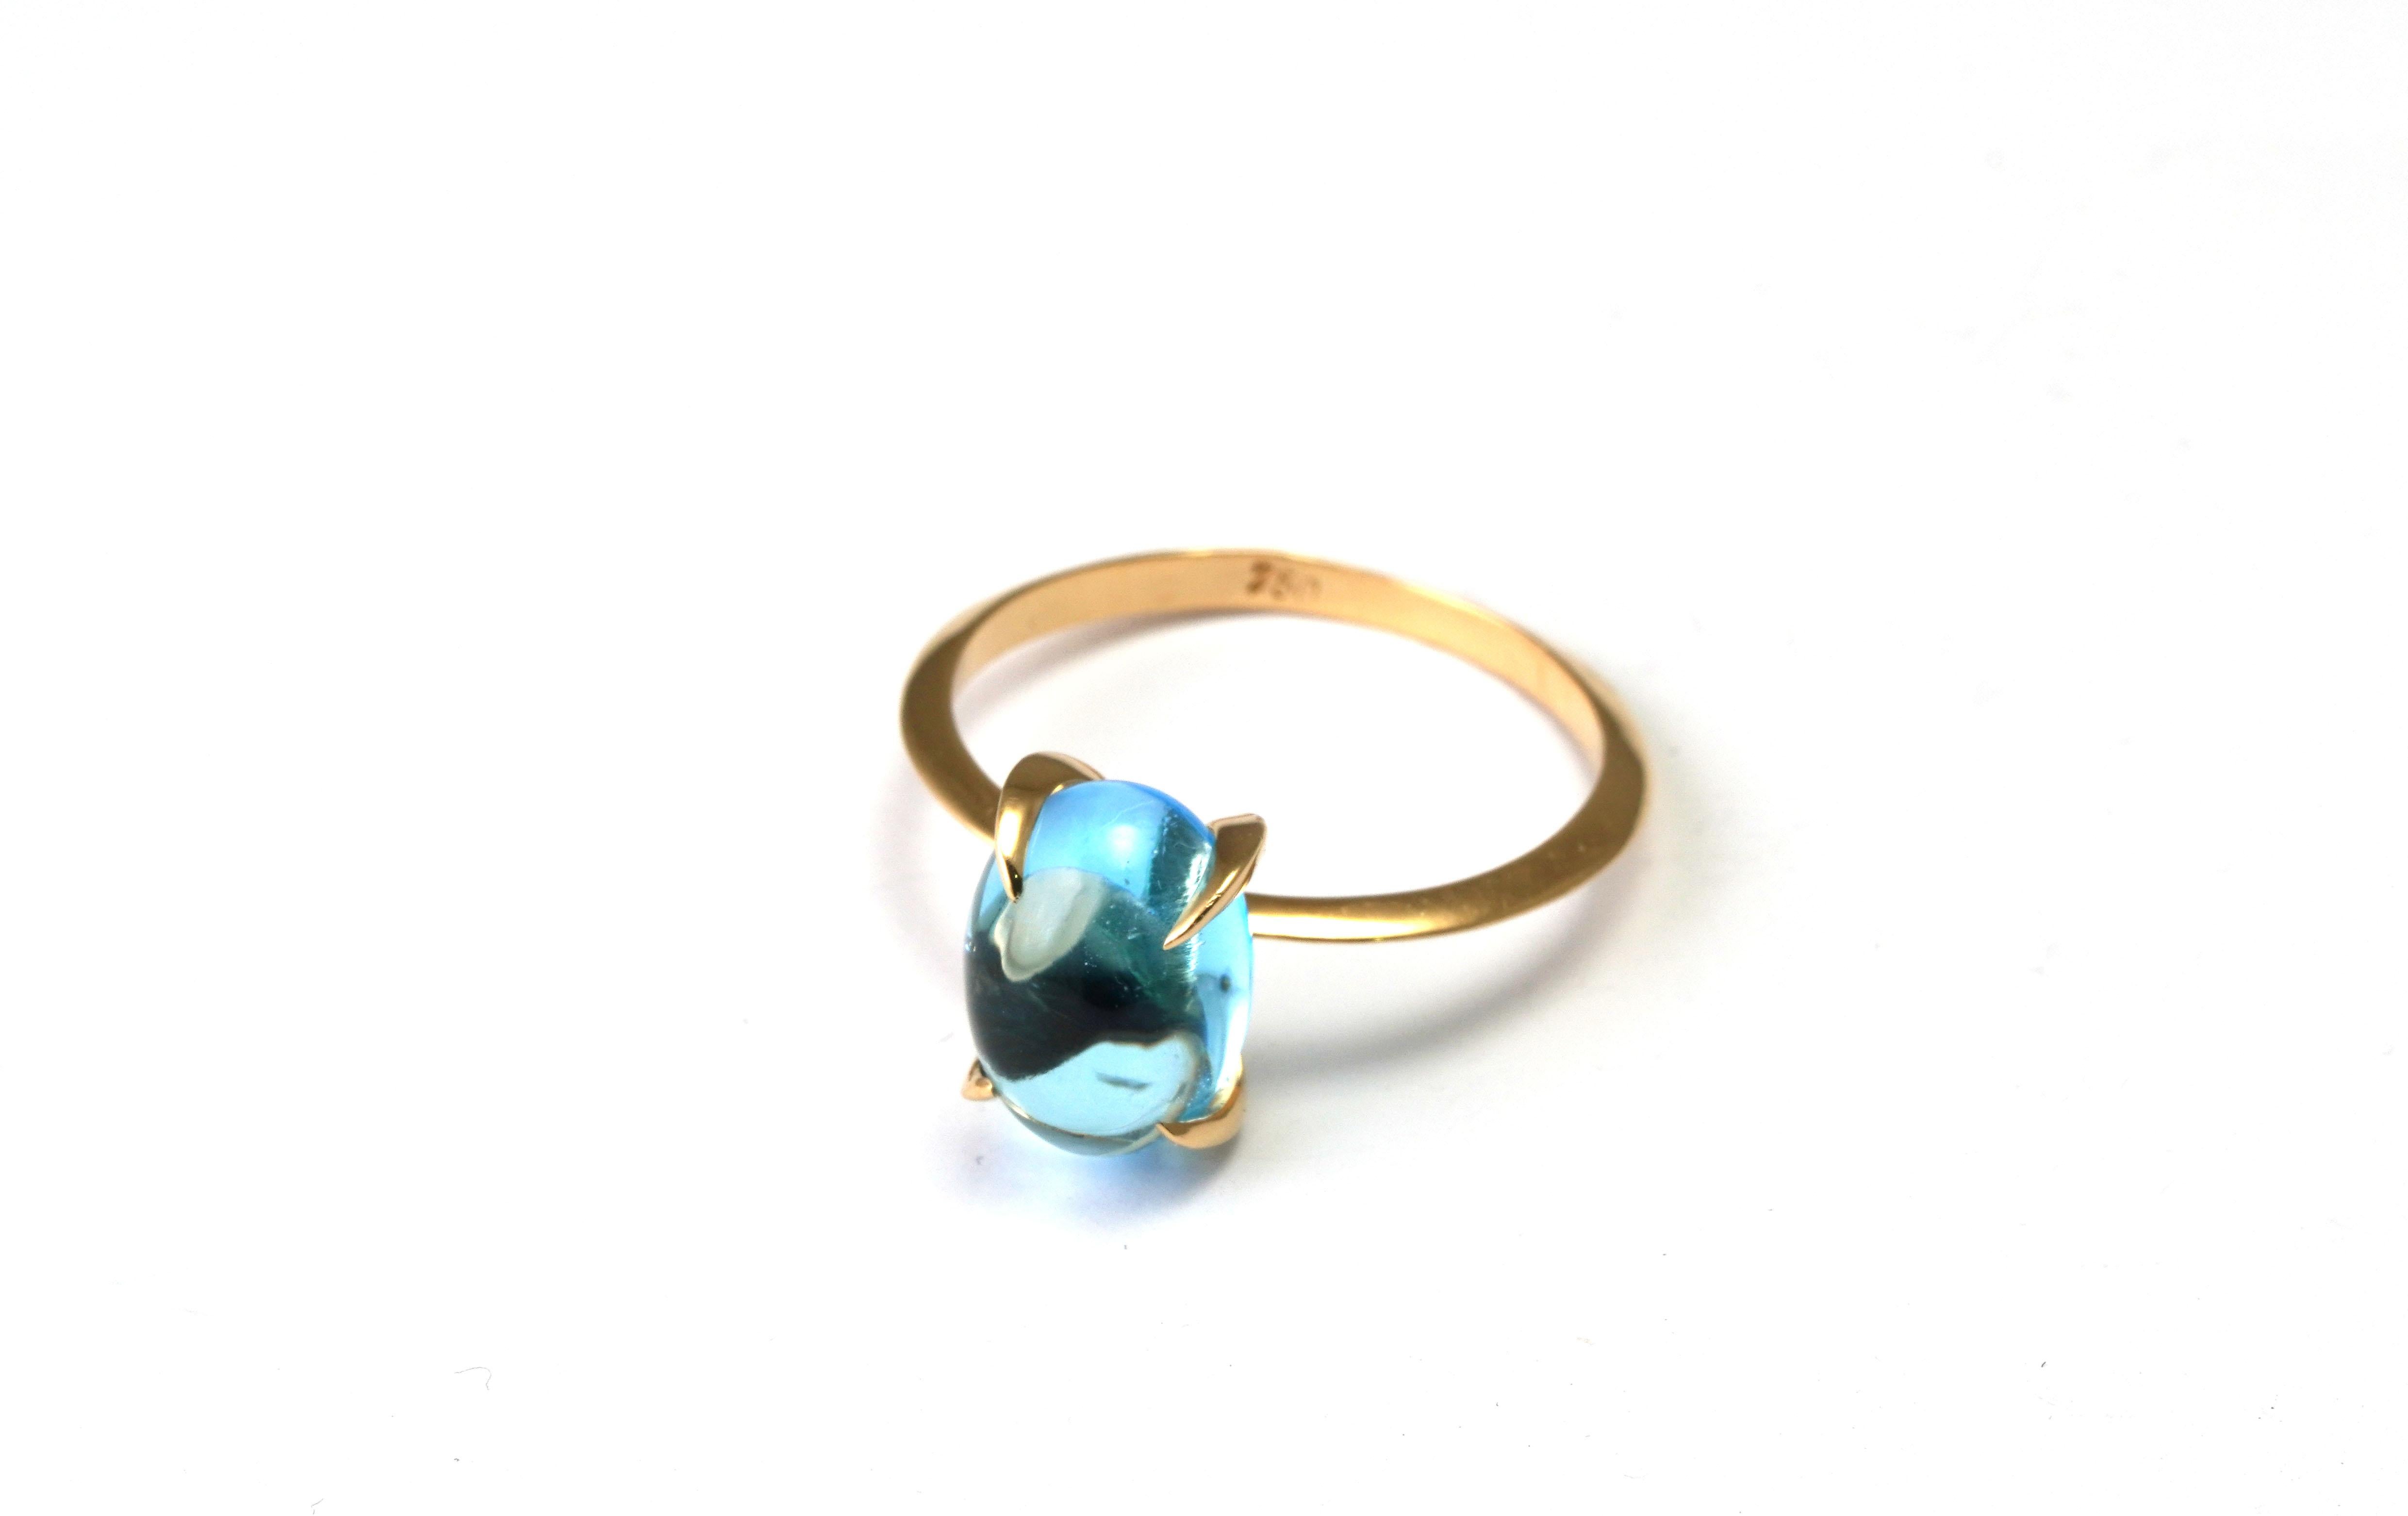 18 kt Gold ring with Blue Topaz
Gold color: Yellow
Ring size: 6 1/2 US
Total weight: 2.65 grams

Set with:
- Topaz
Cut: Cabochon
Weight: 4.65 ct
Color: Blue